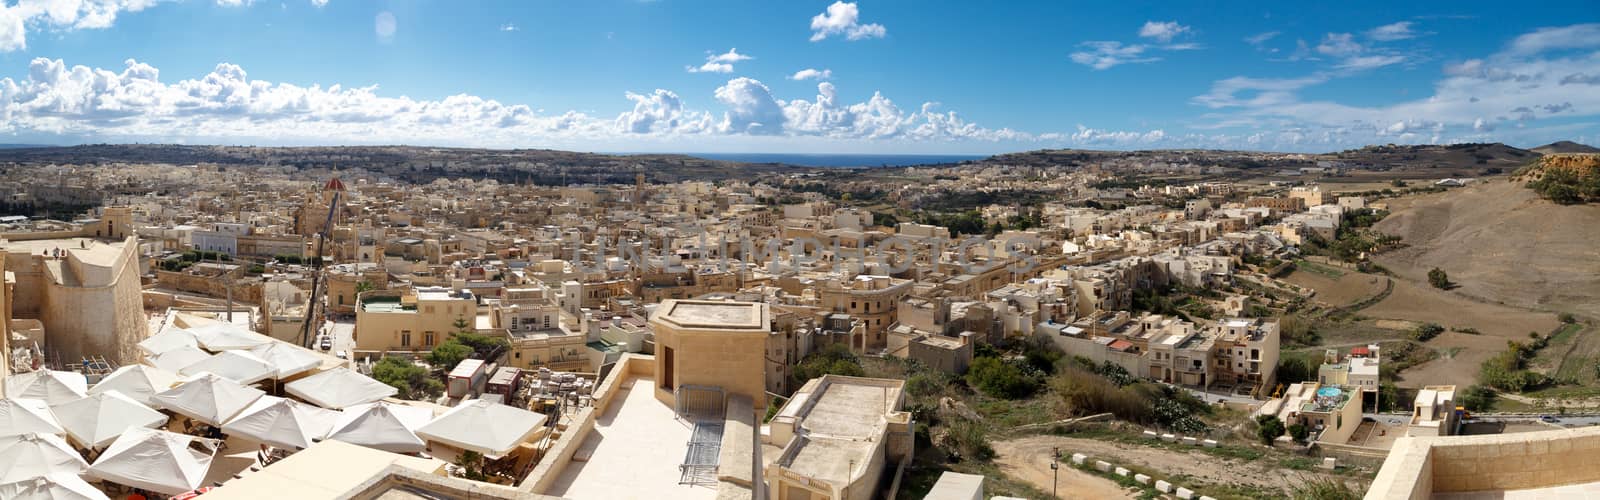 VICTORIA, MALTA - OCTOBER 31, 2015 : View of Victoria city in Malta, with historical limestone buildings, on cloudy blue sky background.